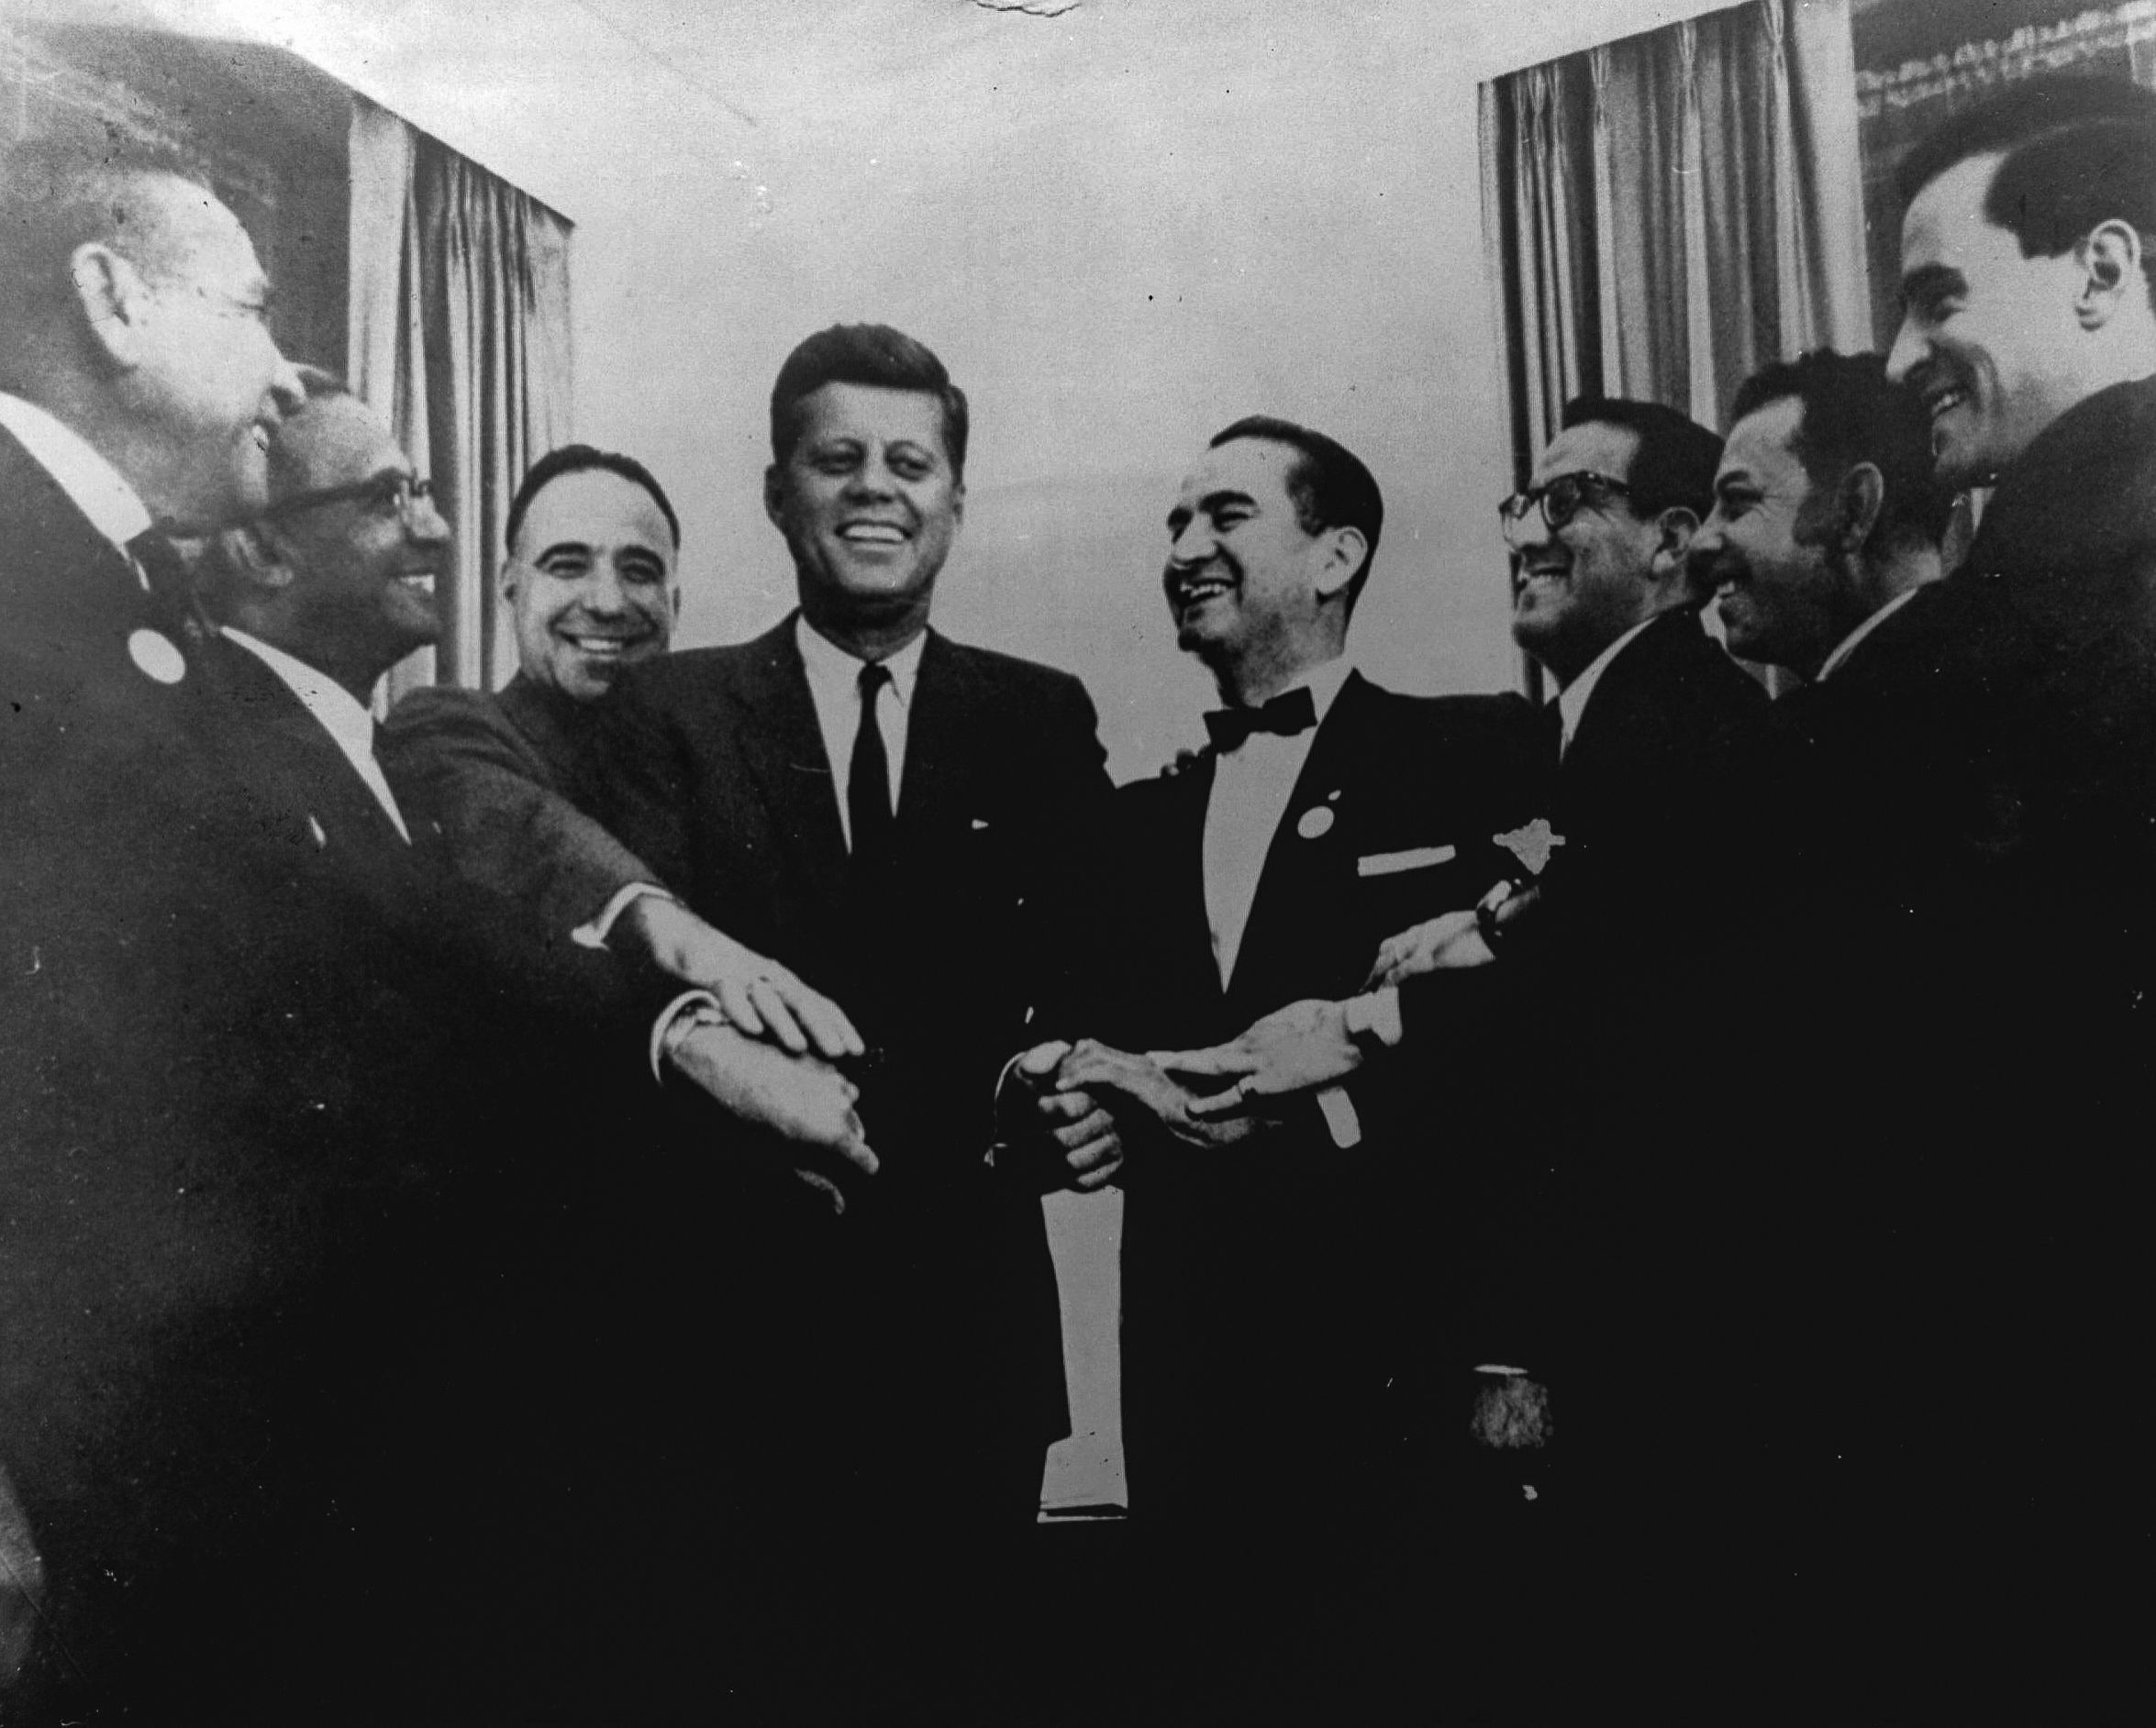 John F. Kennedy poses with Dr. Hector P. Garcia and other Mexican American leaders of Viva Kennedy clubs. The clubs helped Kennedy win 85 to 90% of the national Latino vote in the 1960 presidential election.